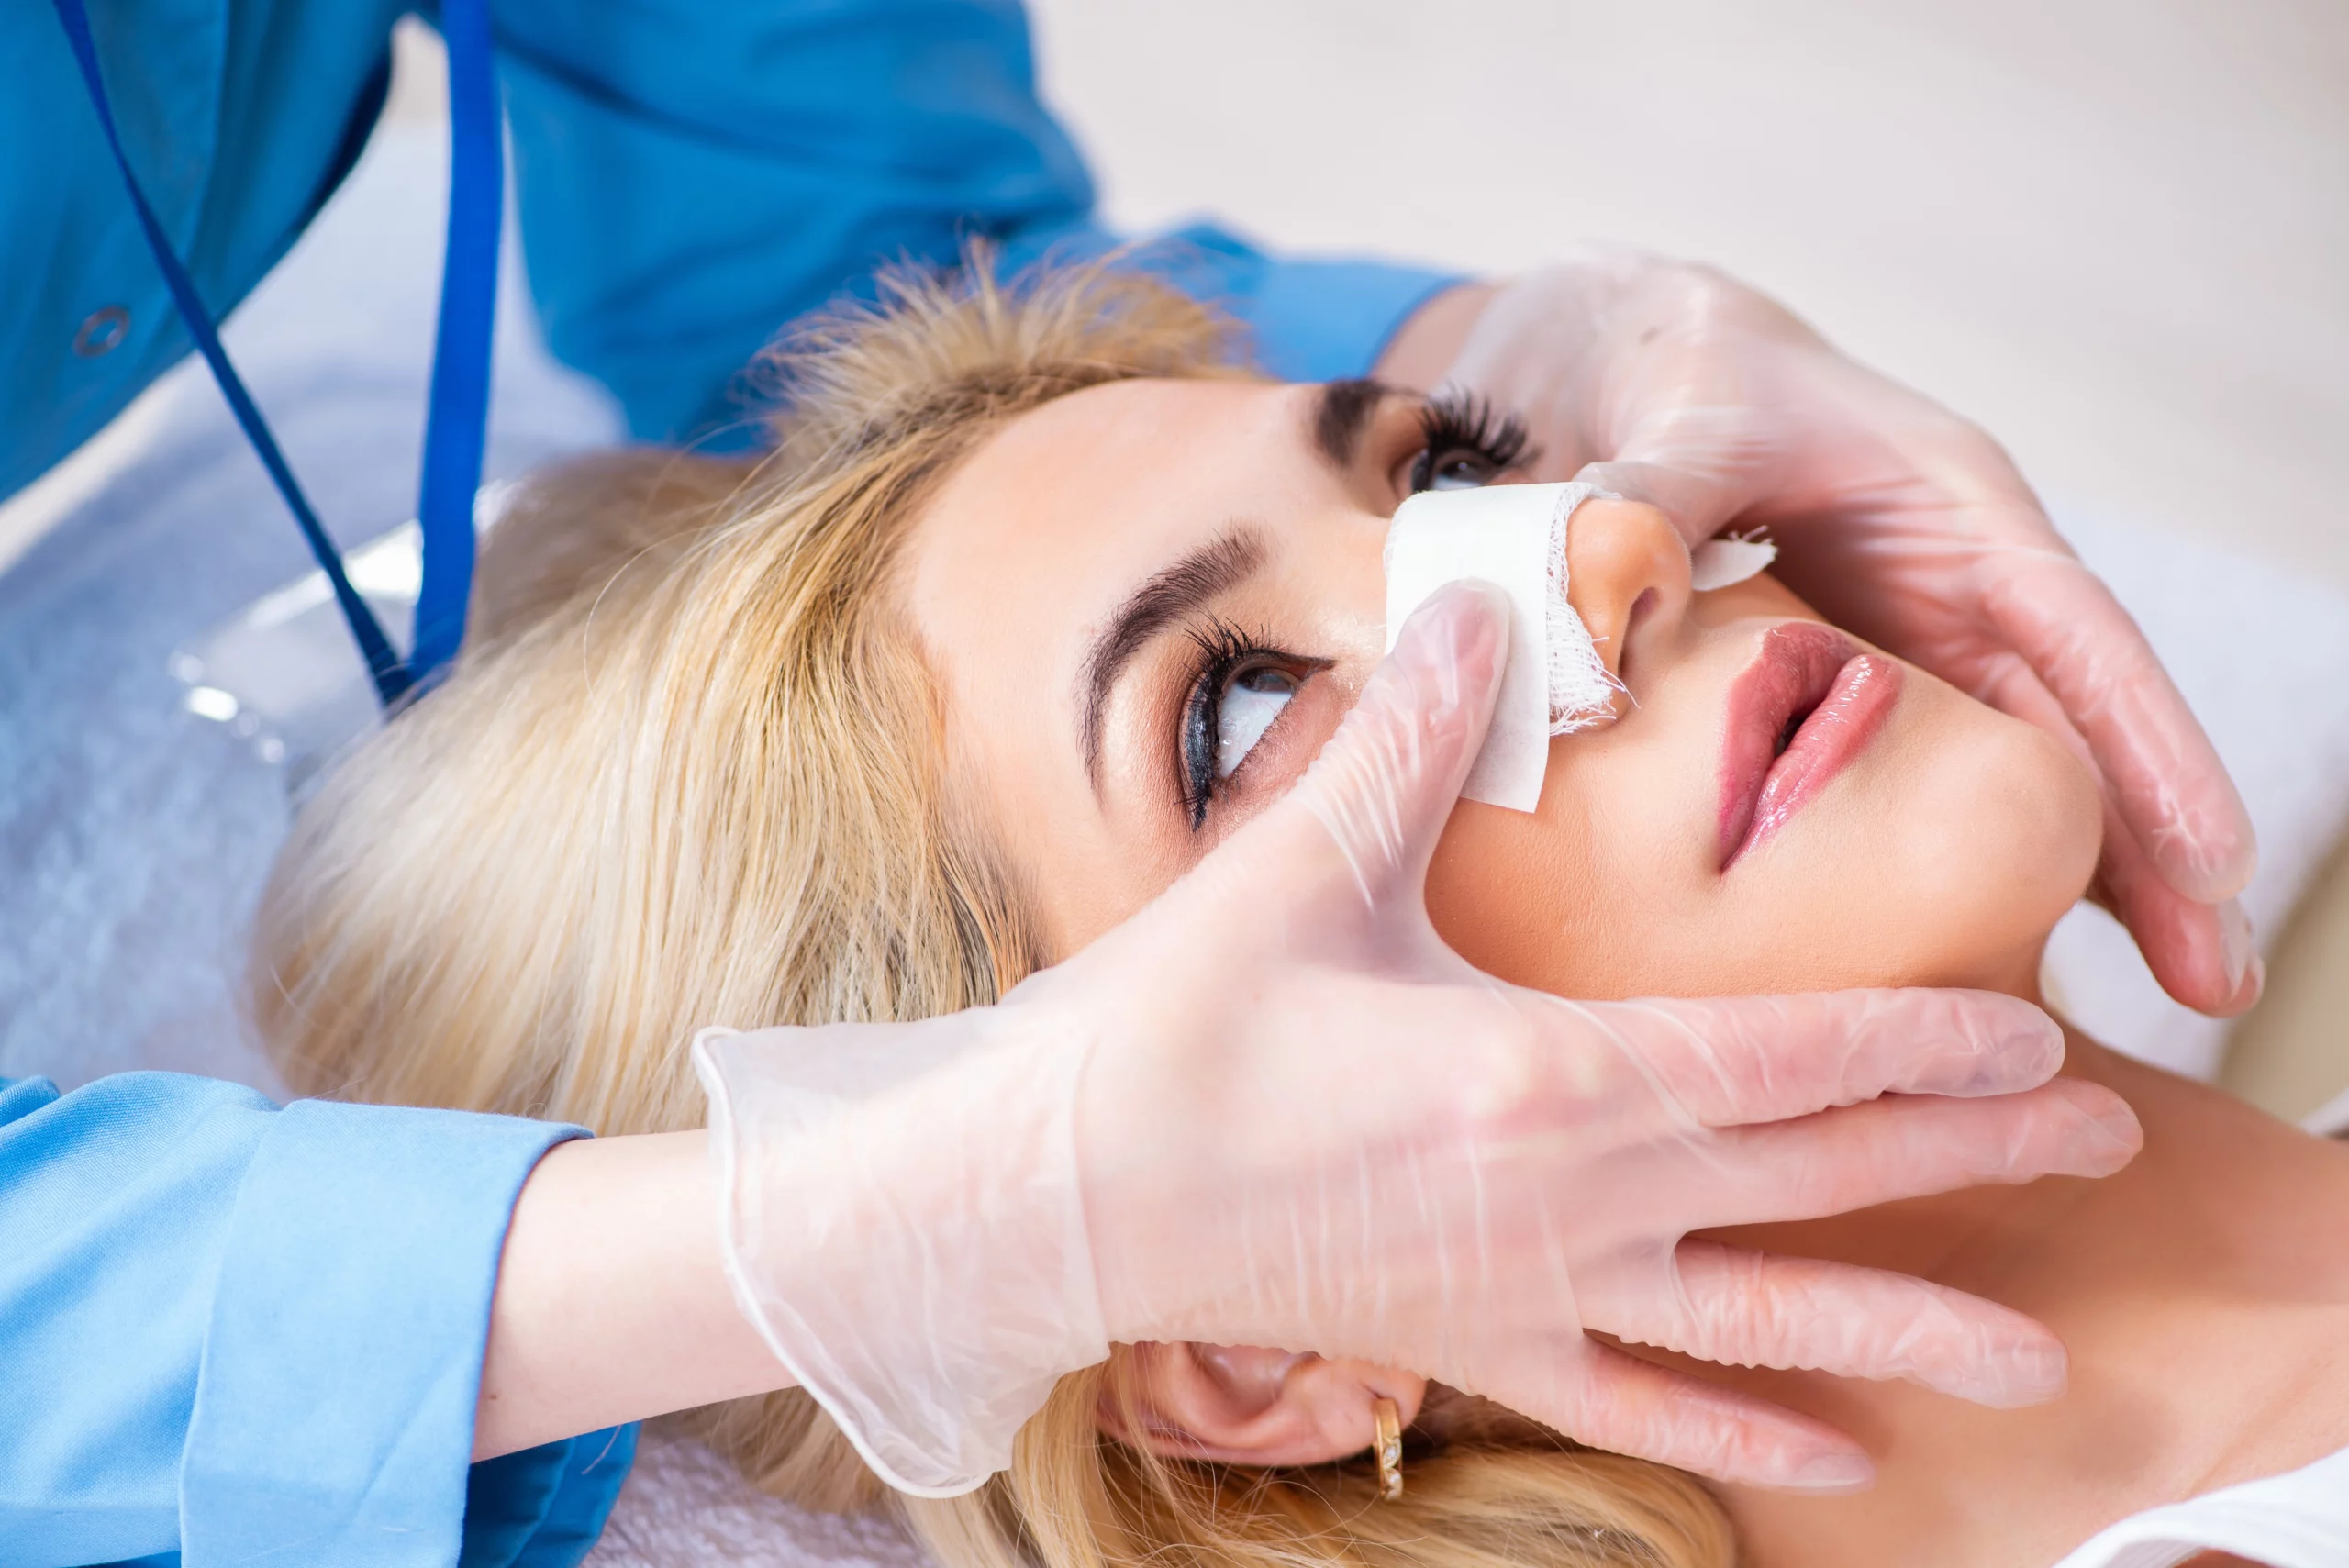 A Quick Guide To Preparing For A Rhinoplasty